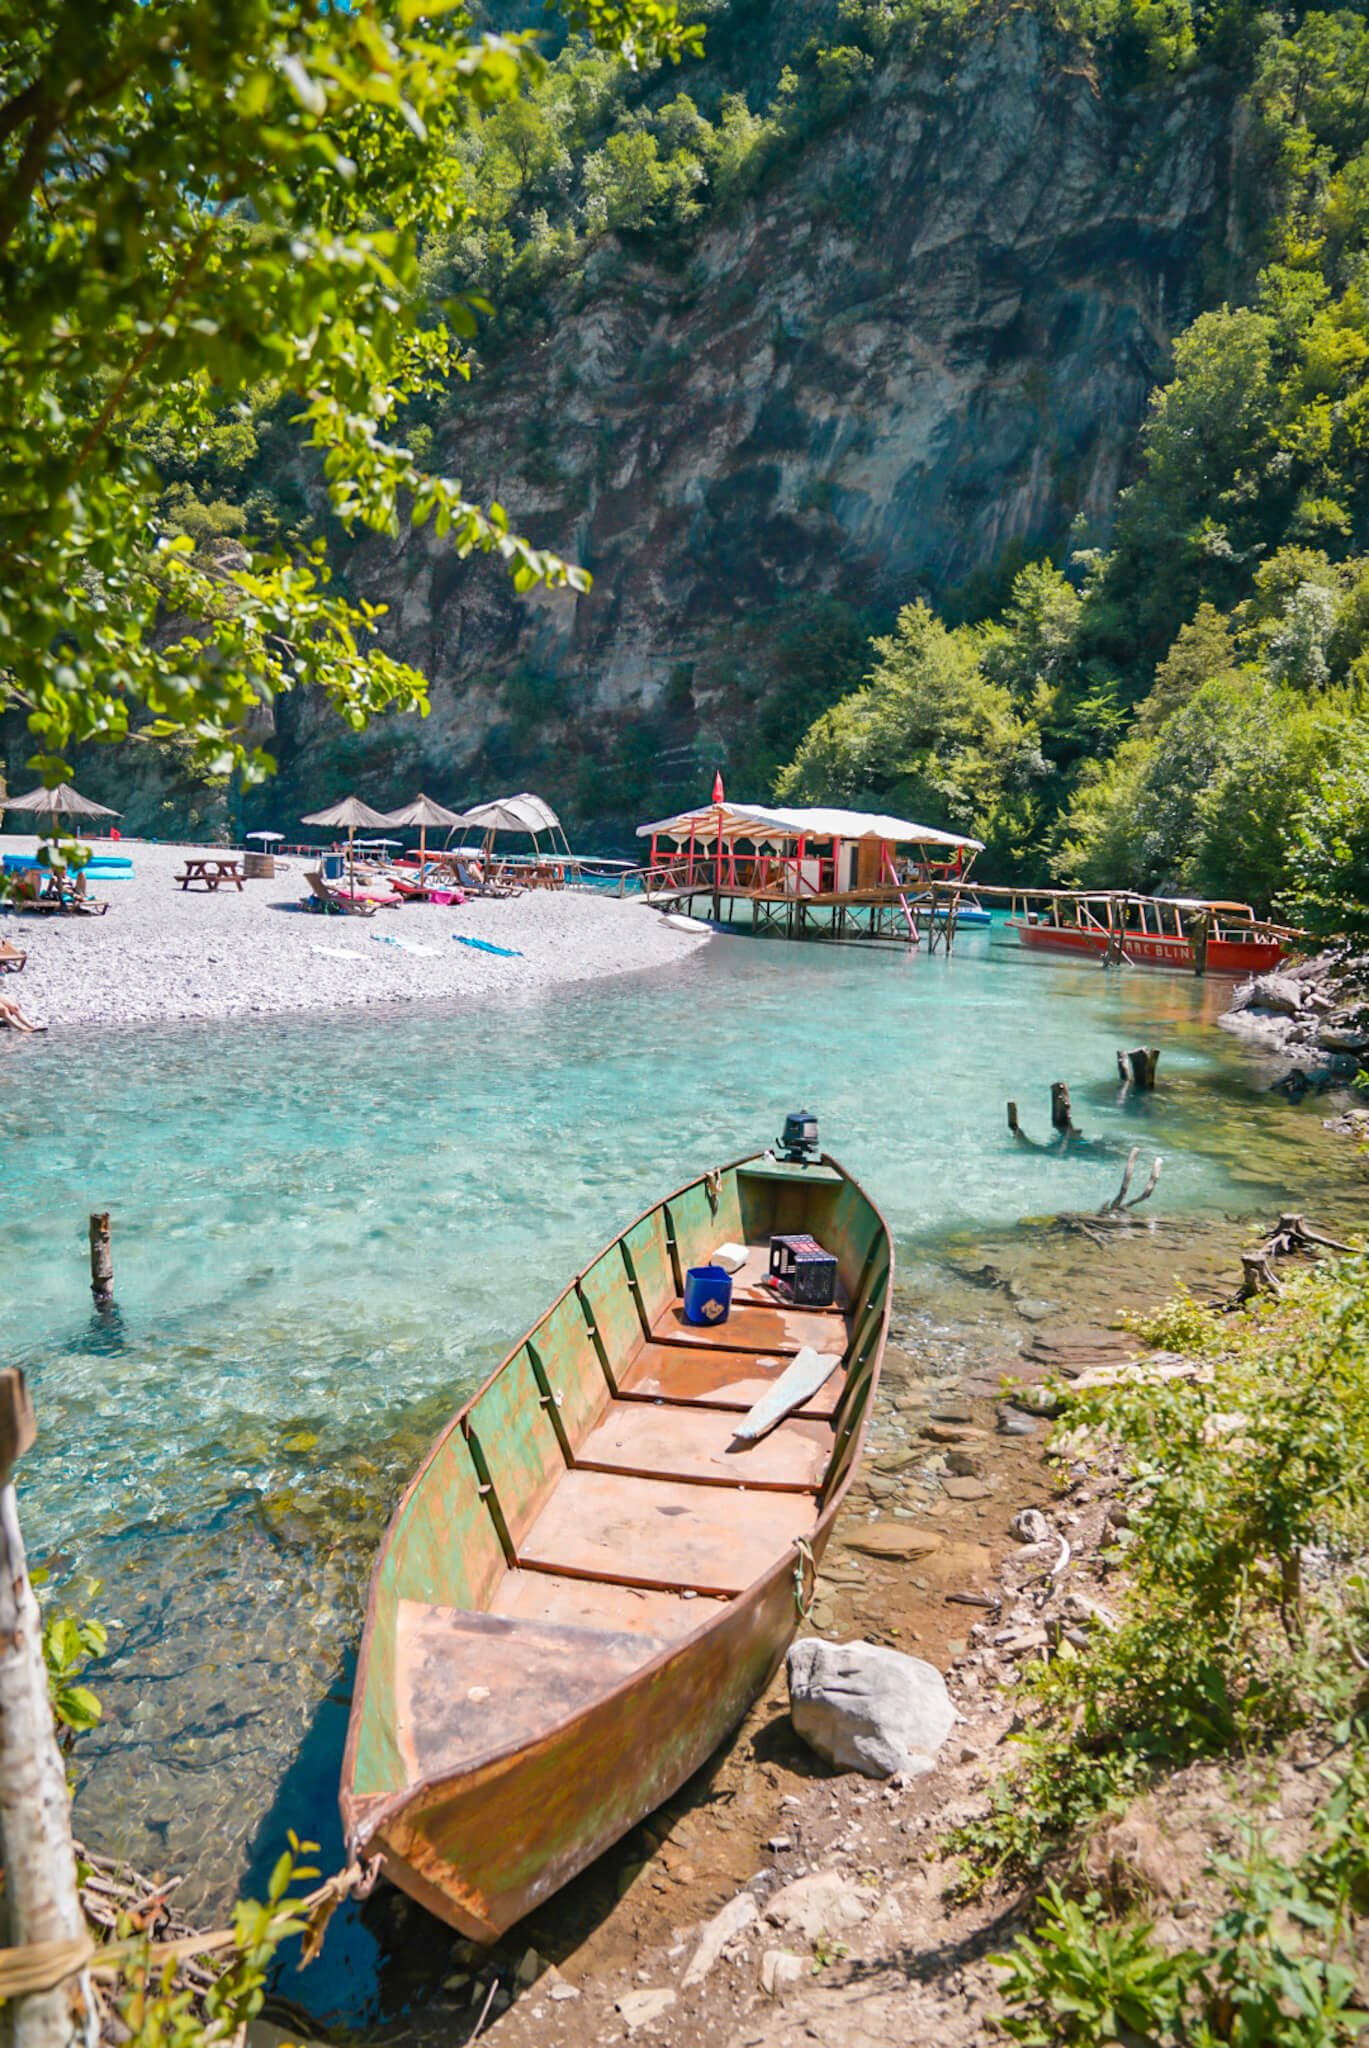 Lumi I Shales, an incredible place in Albania